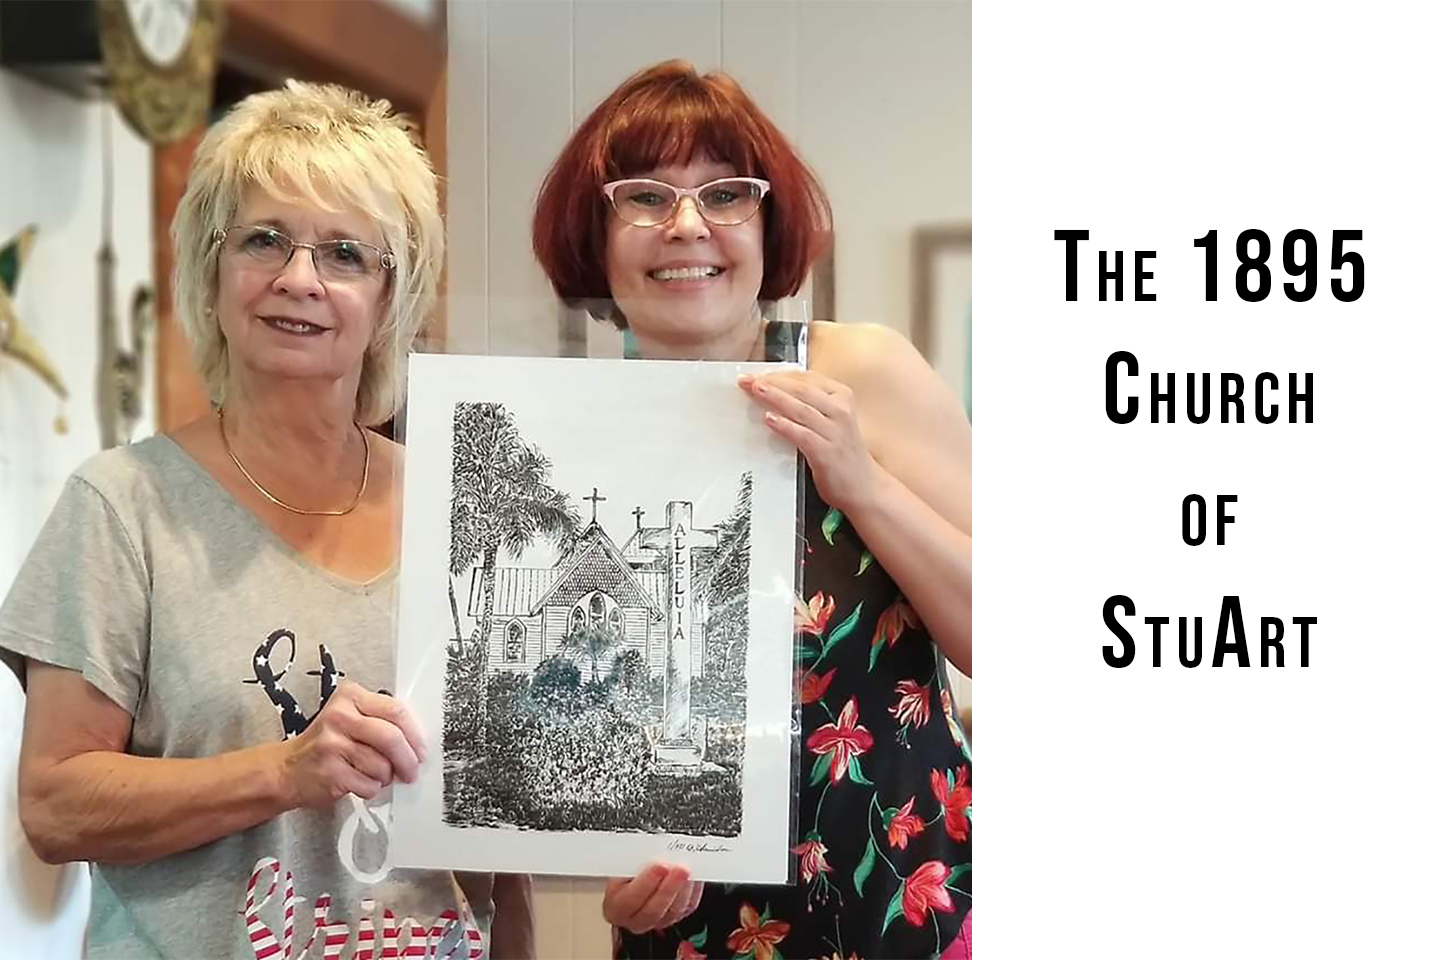 The 1895 Church of StuArt, historical building of the first community church, also known as the pioneer church, built in Stuart in 1895. Local history and art. Fine art studio in Downtown Stuart, Florida